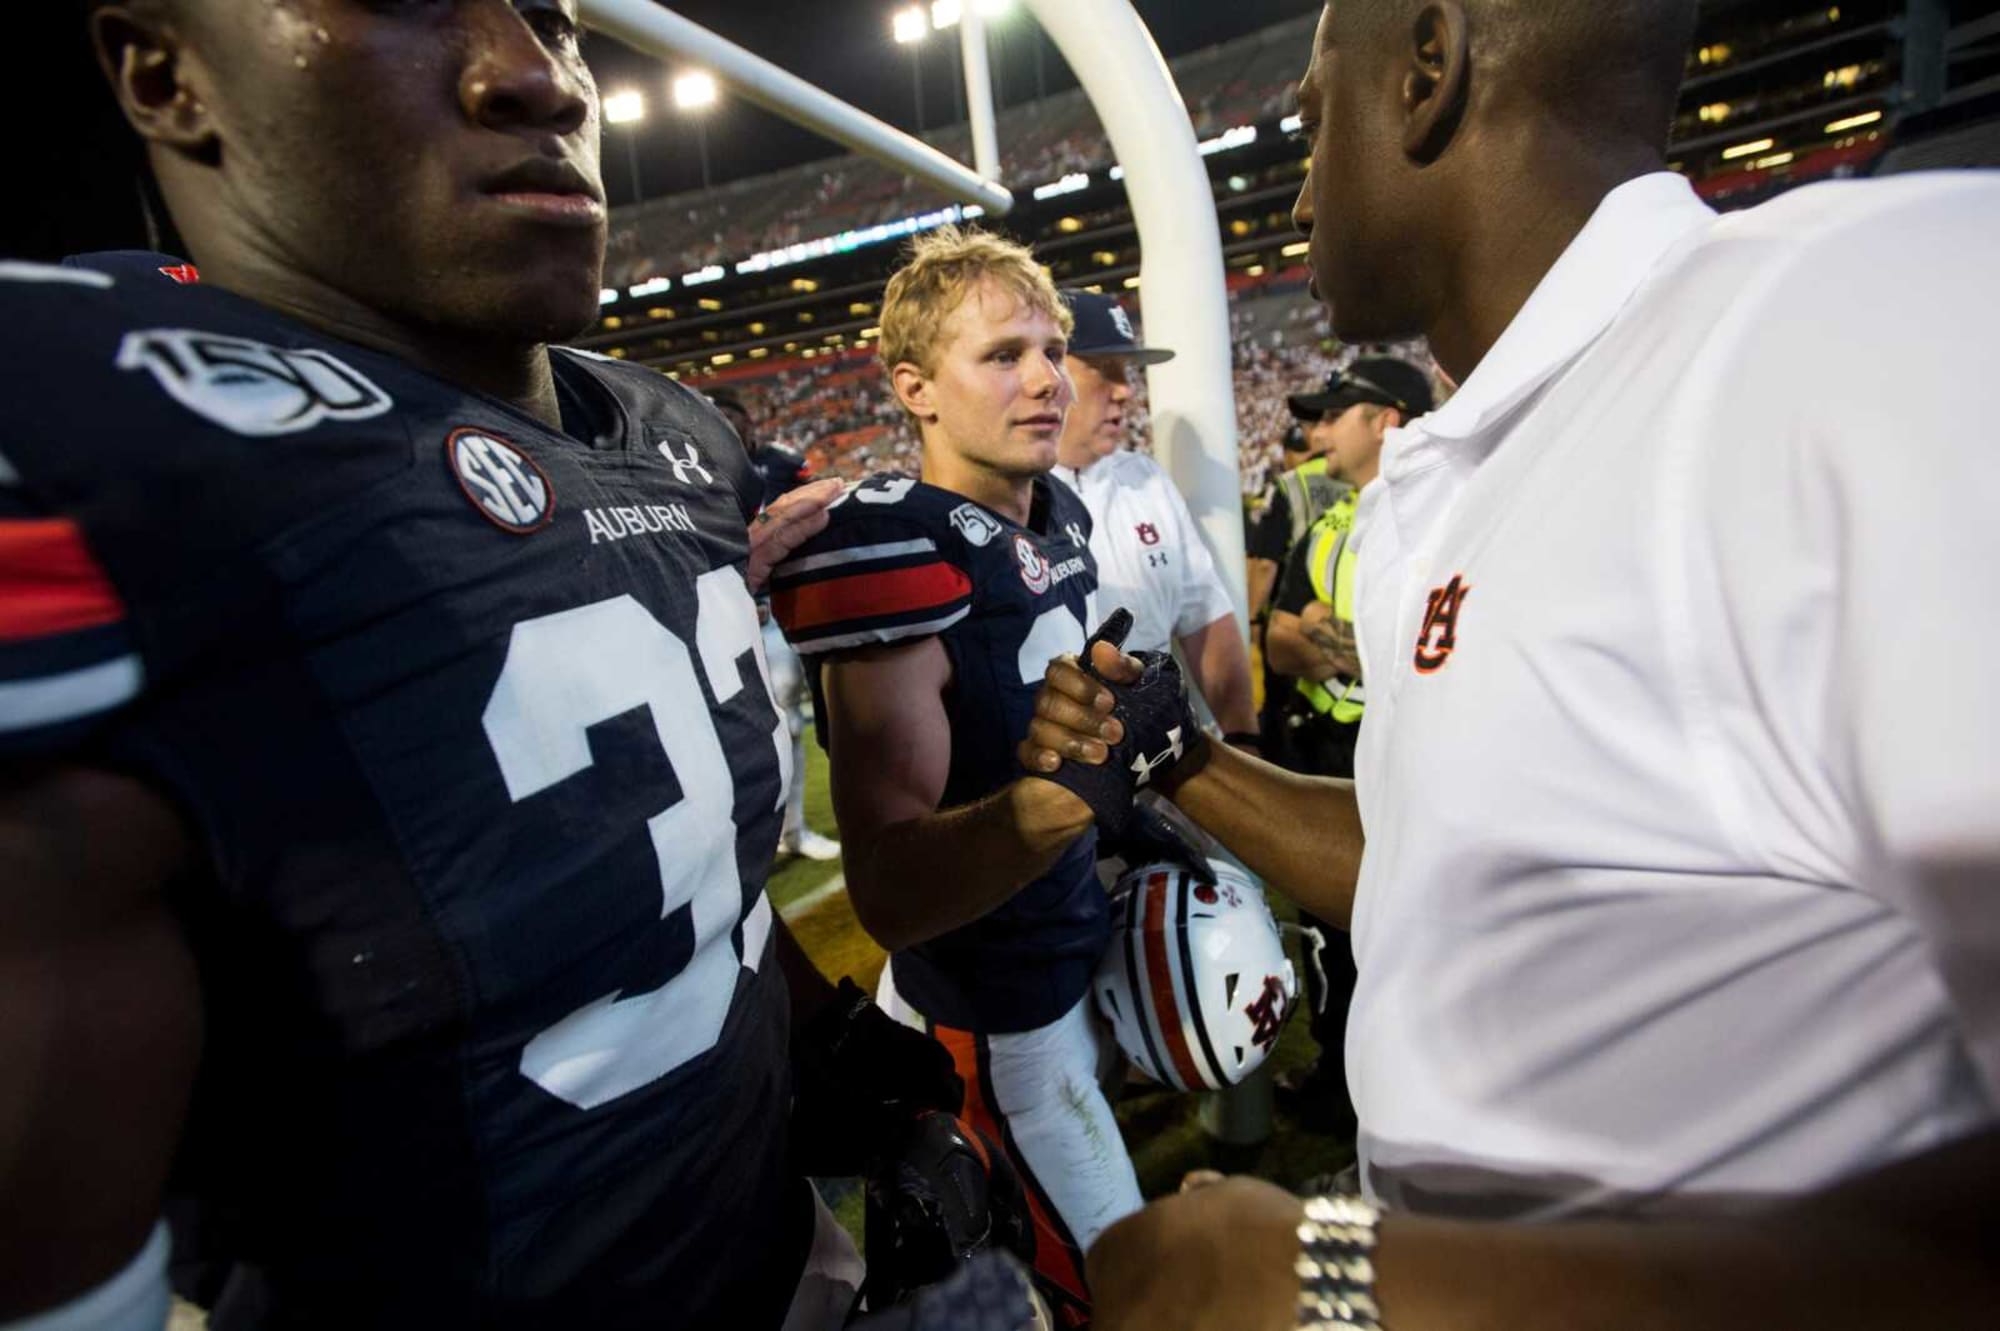 Allen Greene's Rocky Tenure As AD Ends, but Auburn's Dysfunction Continues